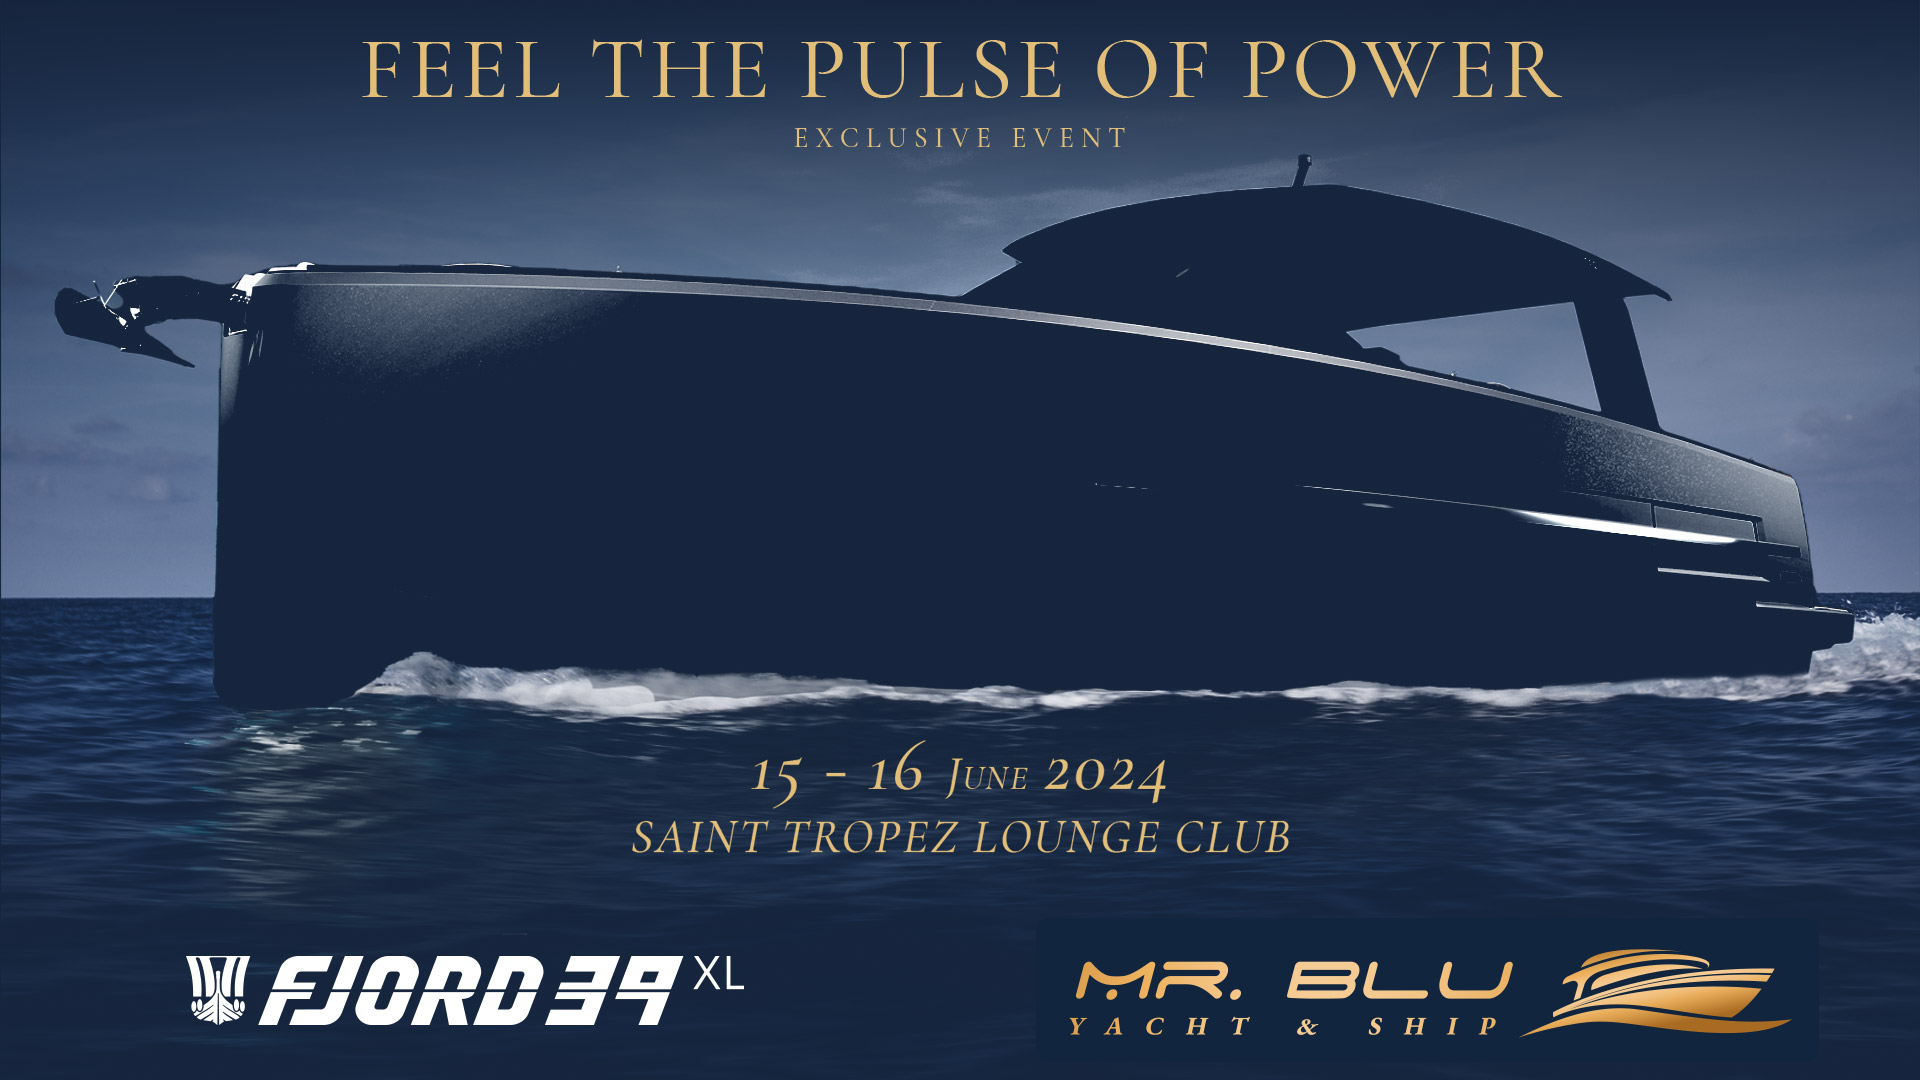 Mr. Blu in Saint-Tropez for the presentation of the New Fjord 39 XL.